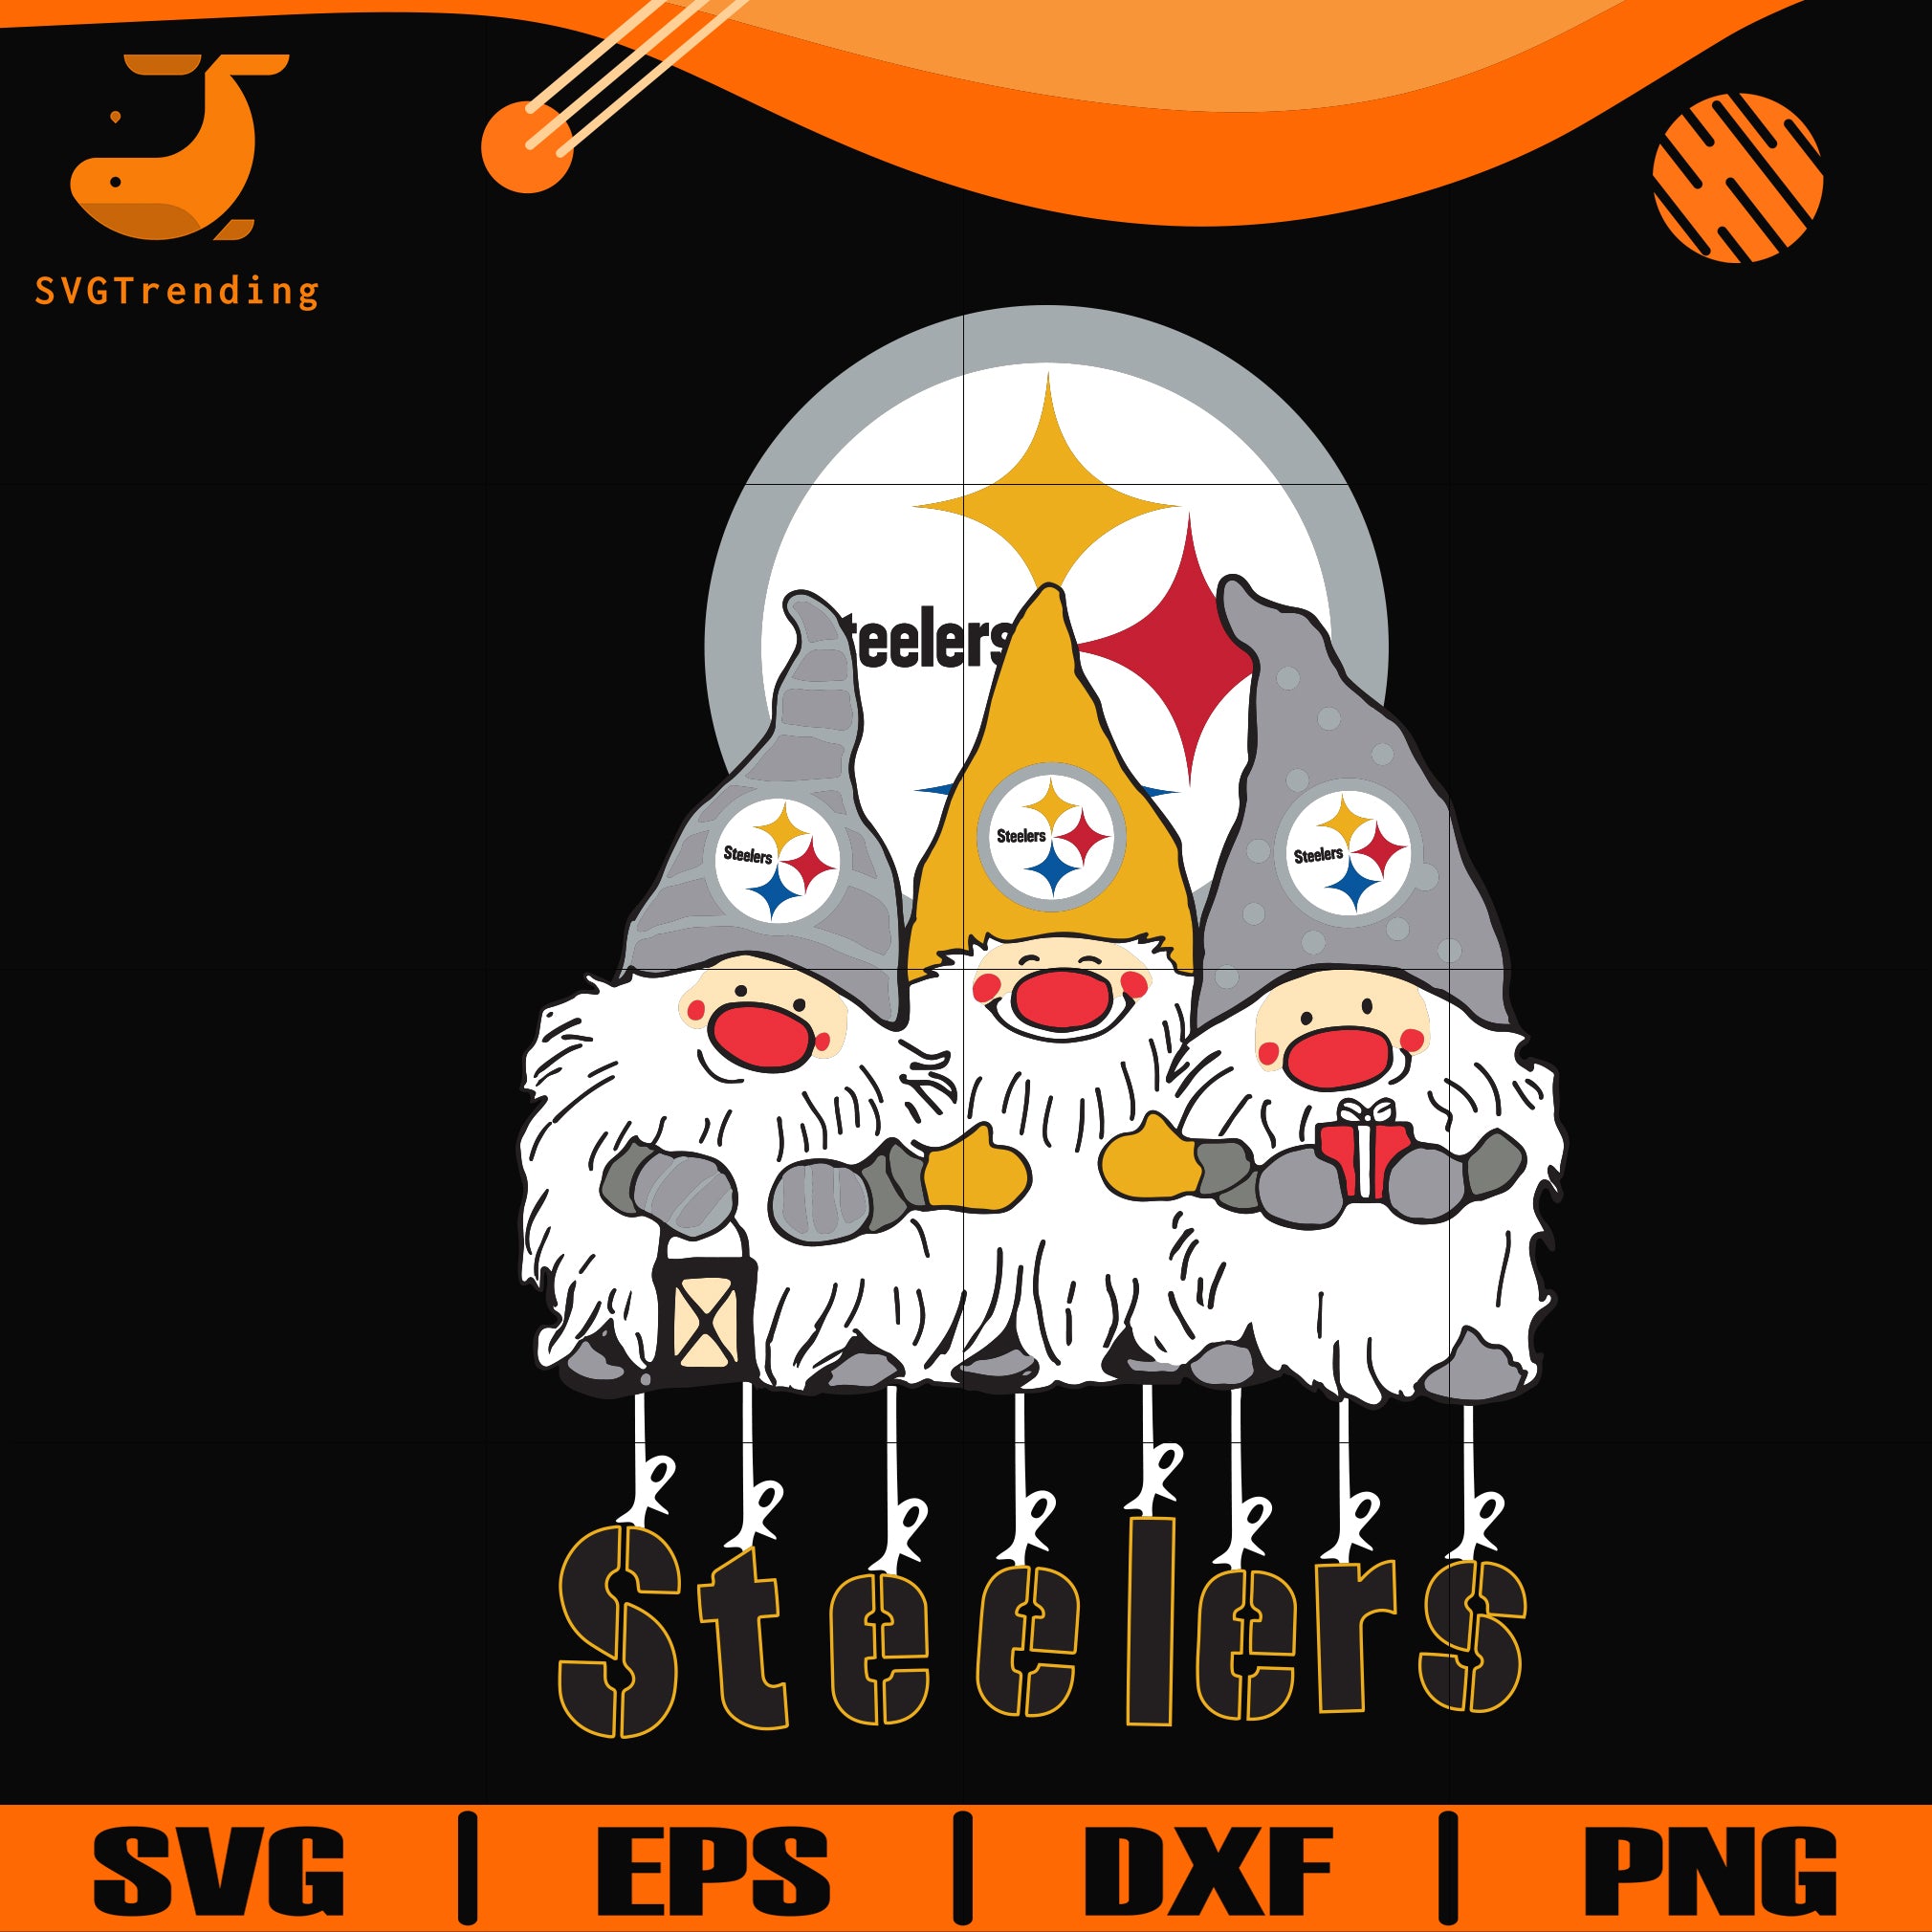 Download Gnomes Pittsburgh Steelers Svg Gnomes Svg Steelers Svg Png Dxf Ep Svgtrending